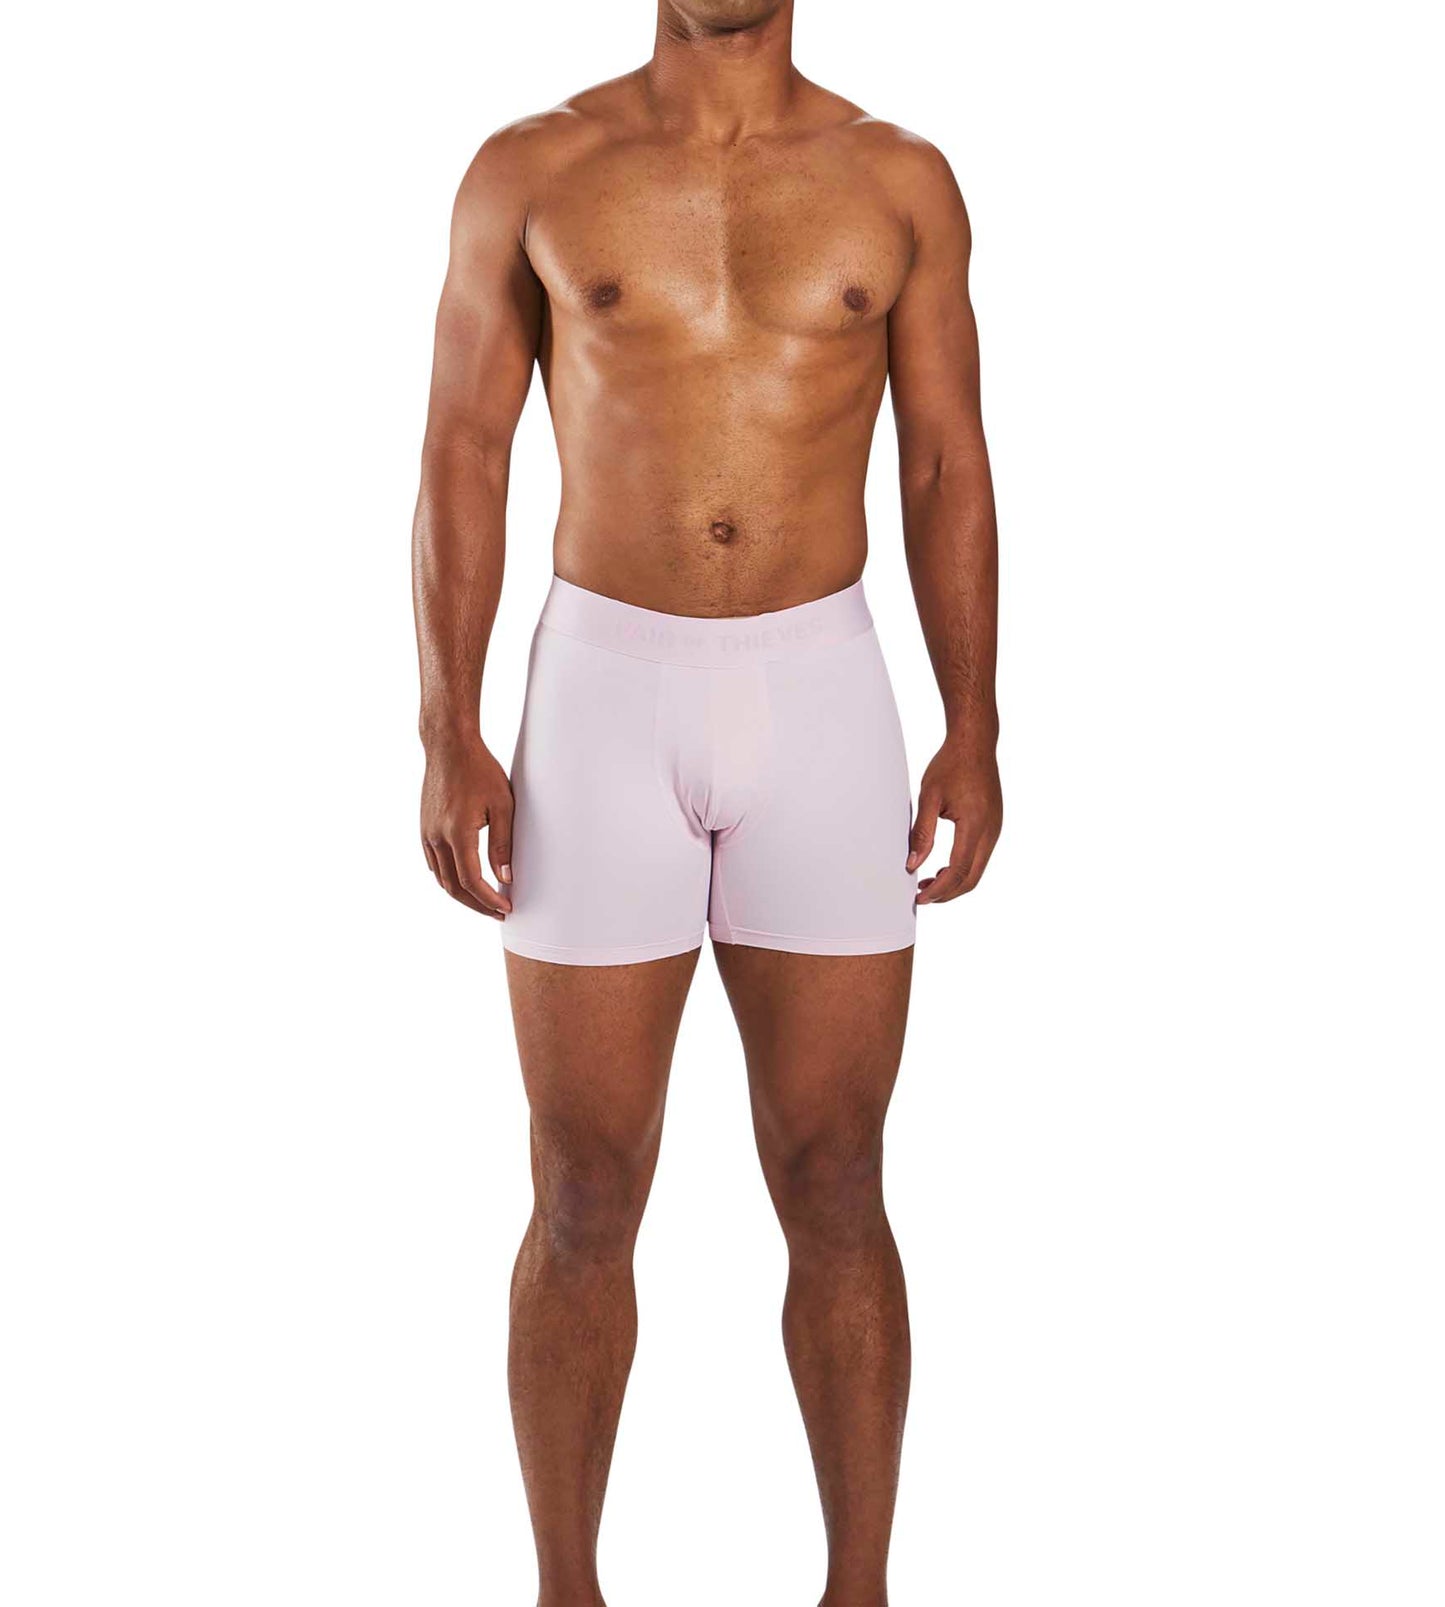 Hustle Boxer Brief 2 Pack colors contain: Saddle brown, Silver, Peru, Rosy brown, Sienna, Maroon, Saddle brown, Light Gray, Sienna